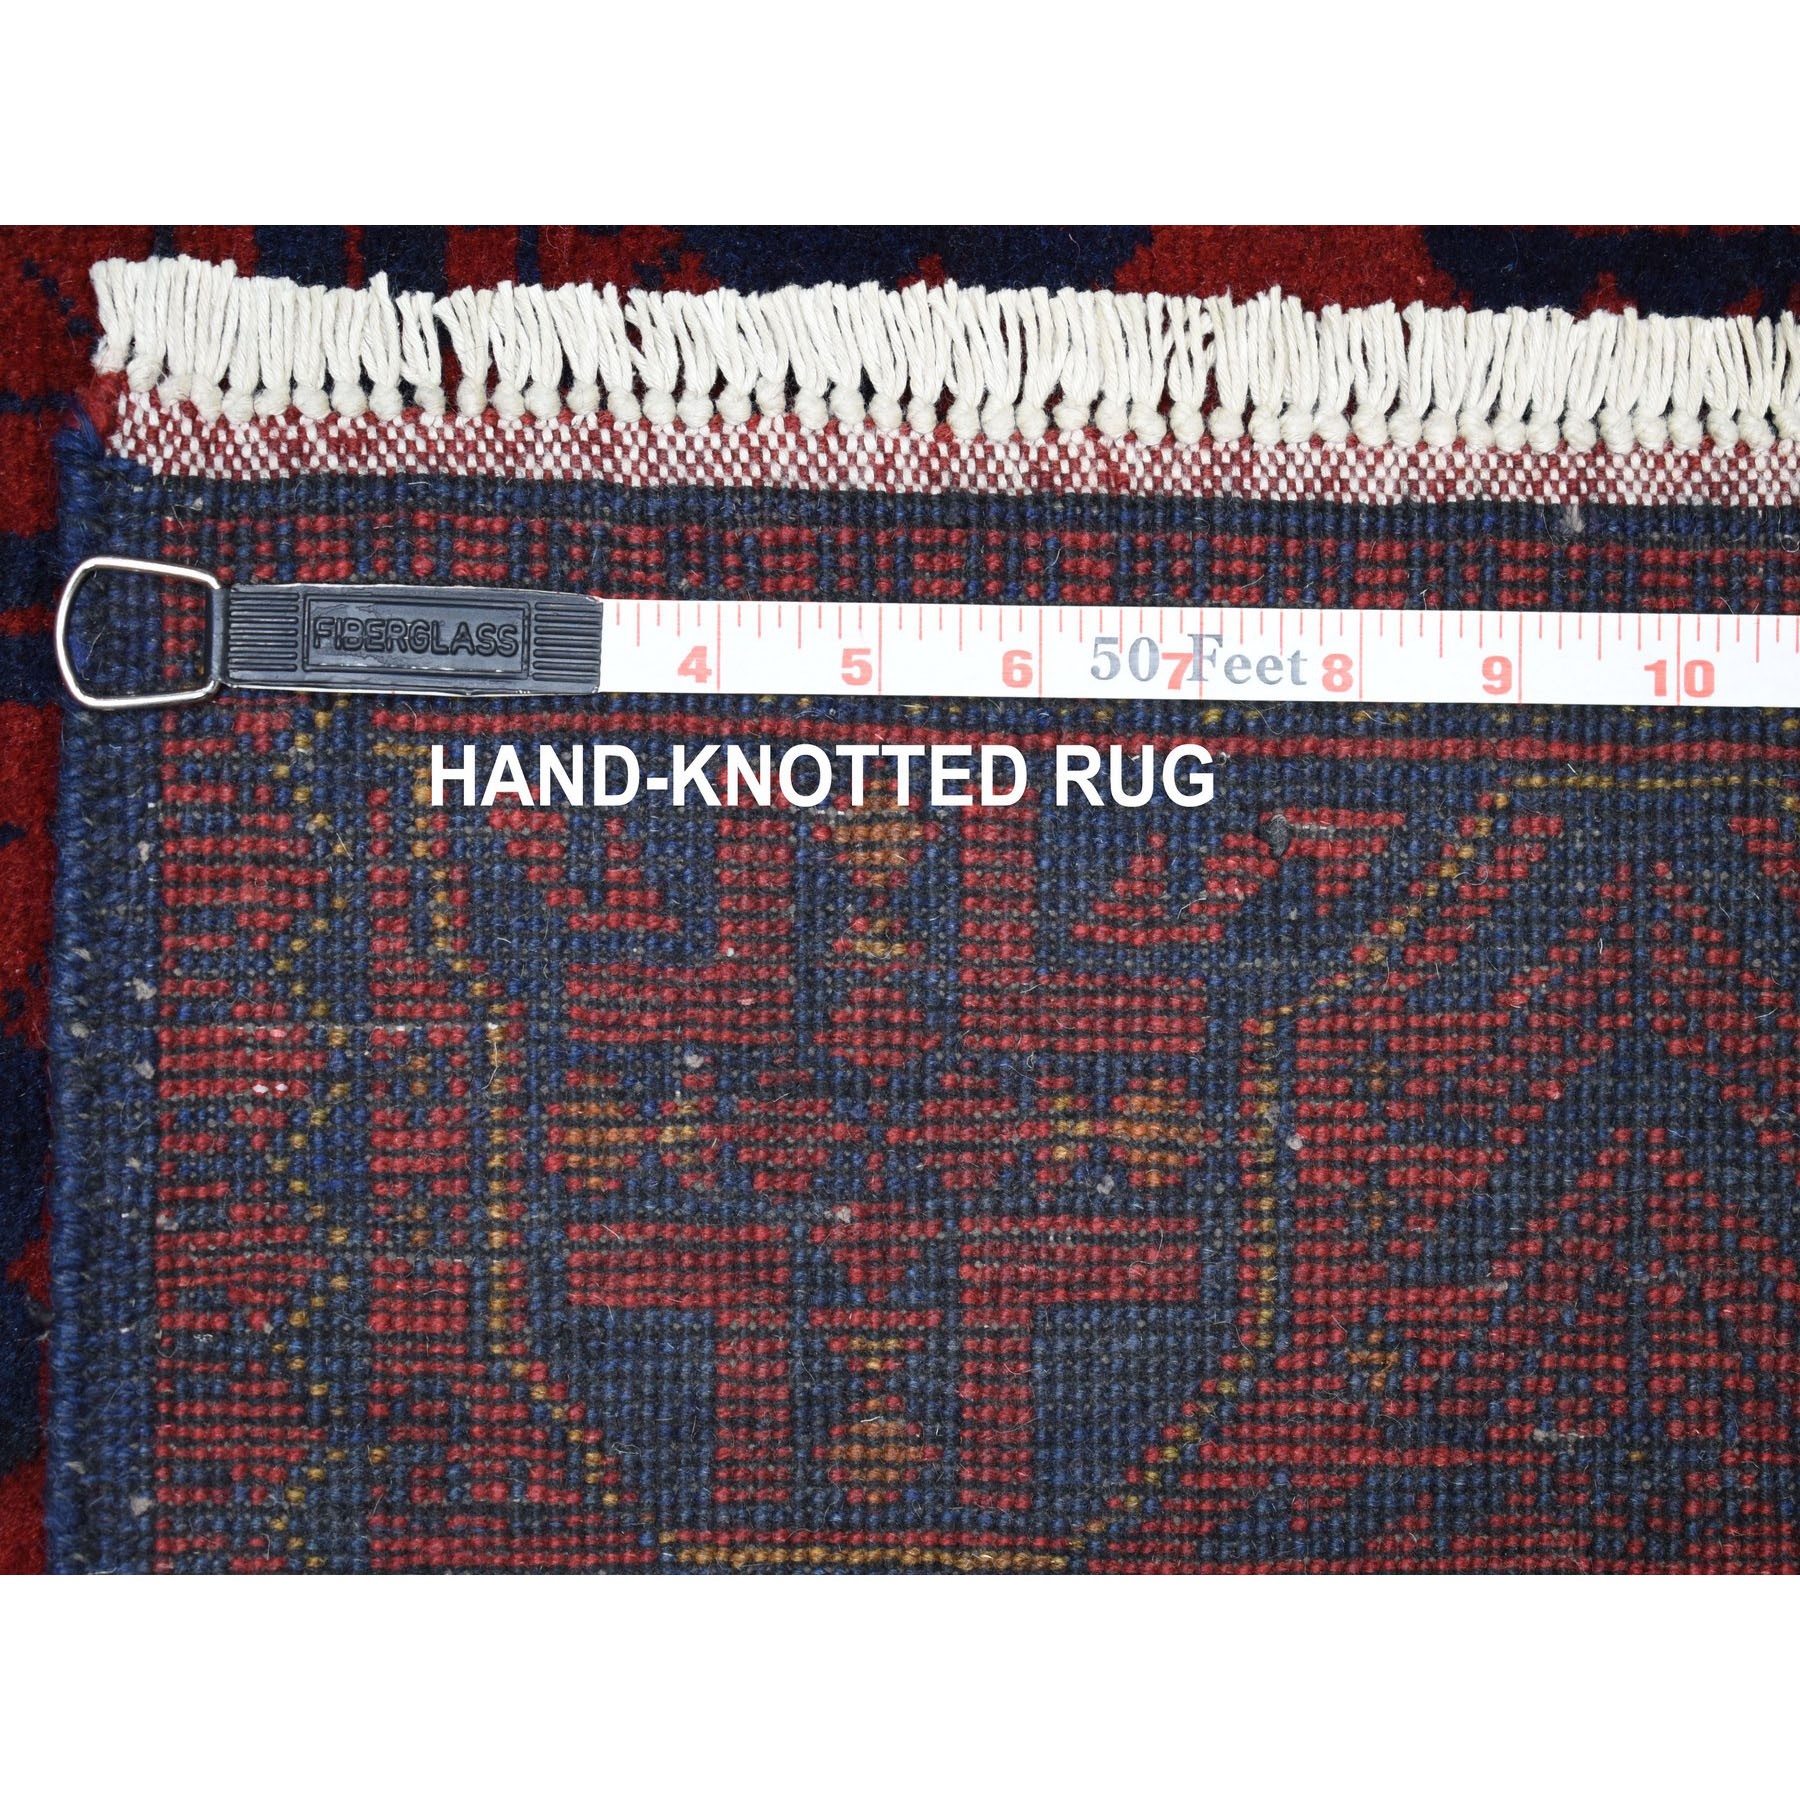 5-9 x7-7  Deep and Saturated Red Geometric Afghan Andkhoy Pure Wool Hand Knotted Oriental Rug 